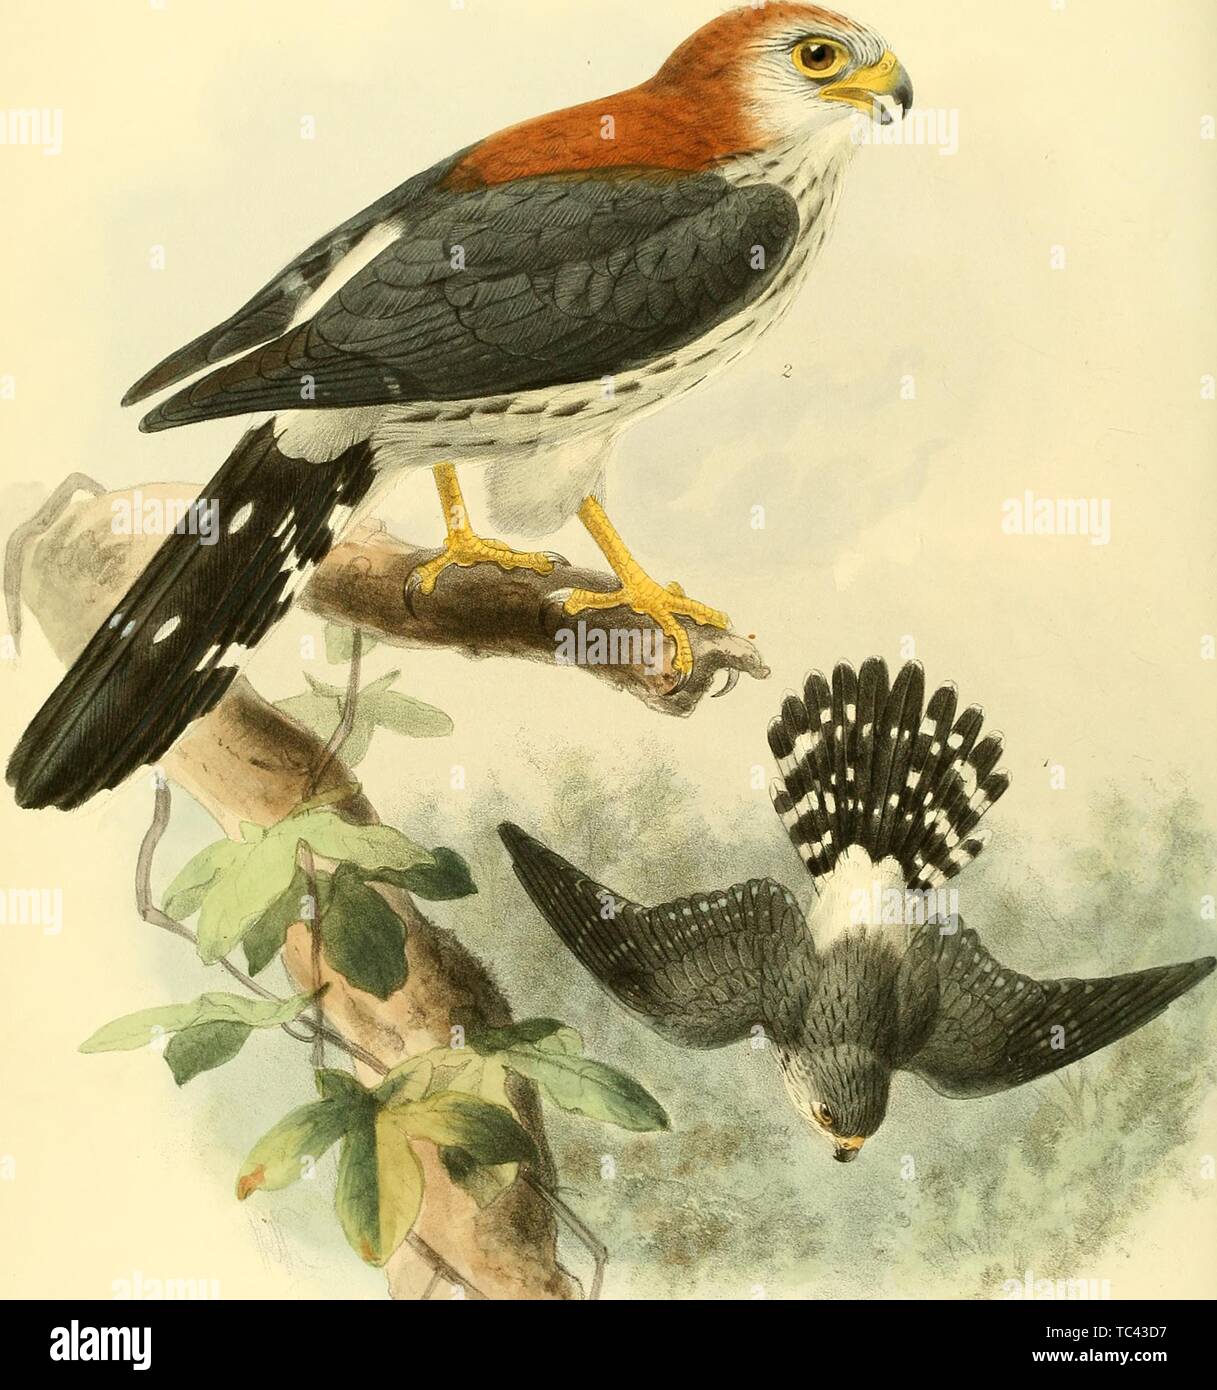 Engravings of the White-Rumped Falcon (Polihierax insignis), from the book 'Ornithological miscellany' by George Dawson Rowley, 1876. Courtesy Internet Archive. () Stock Photo